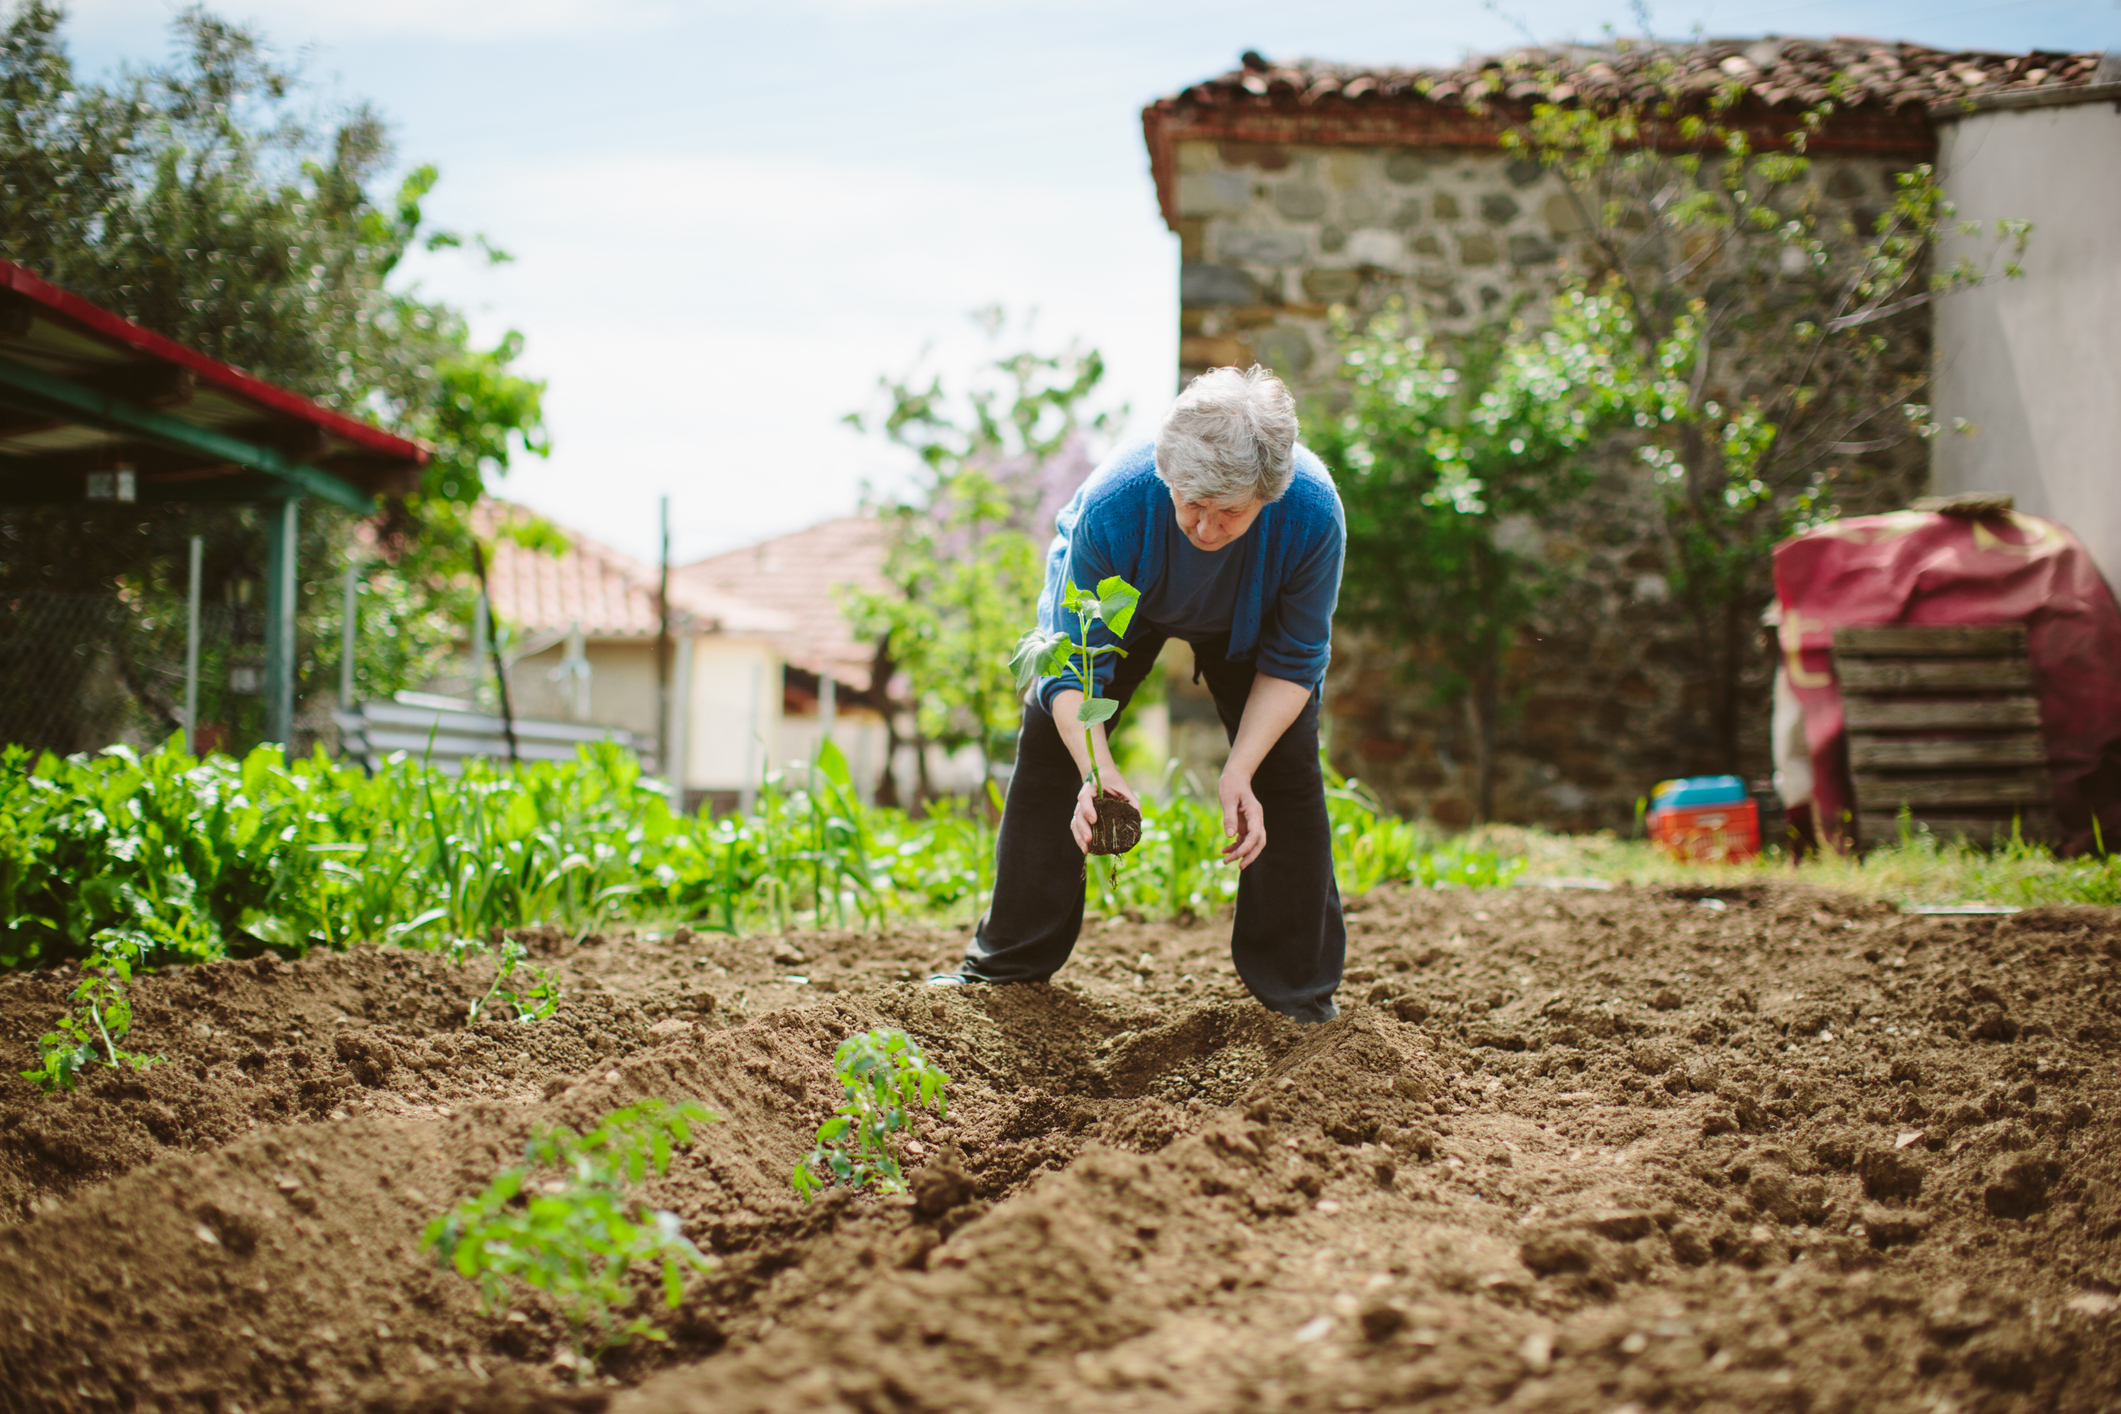 An older adult planting a seedling in a garden with a stone building in the background